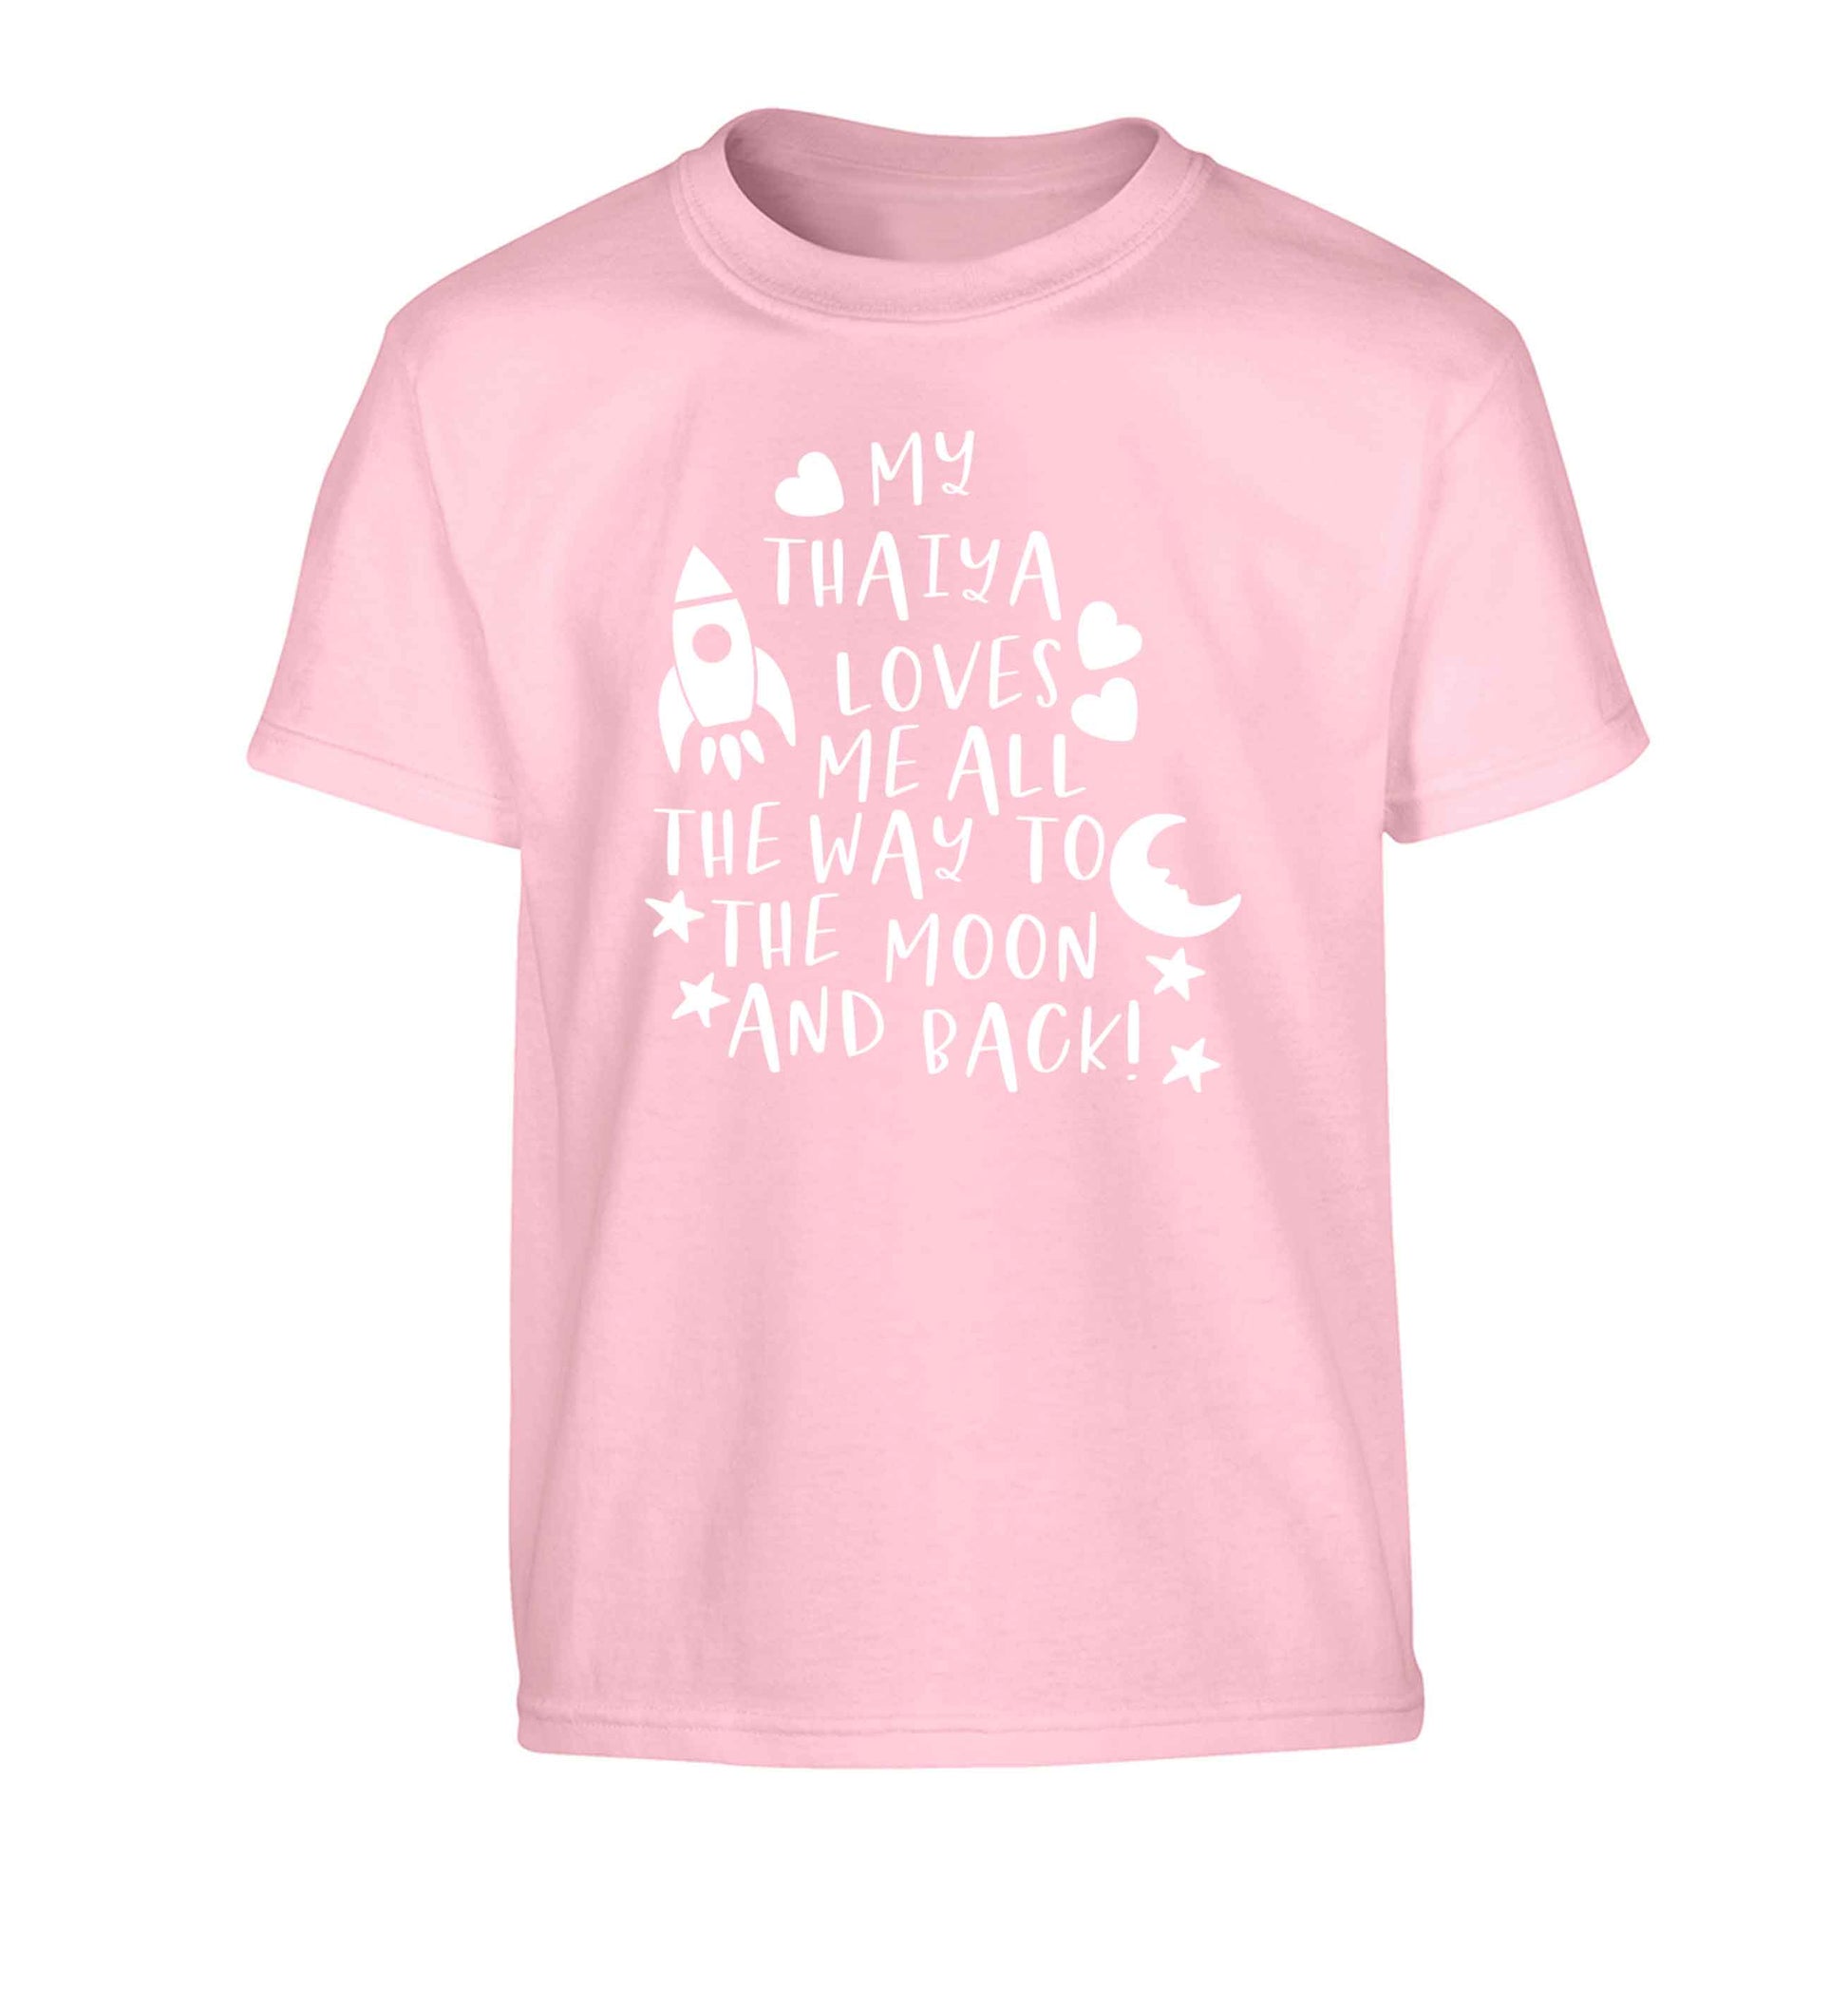 My thaiya loves me all the way to the moon and back Children's light pink Tshirt 12-13 Years